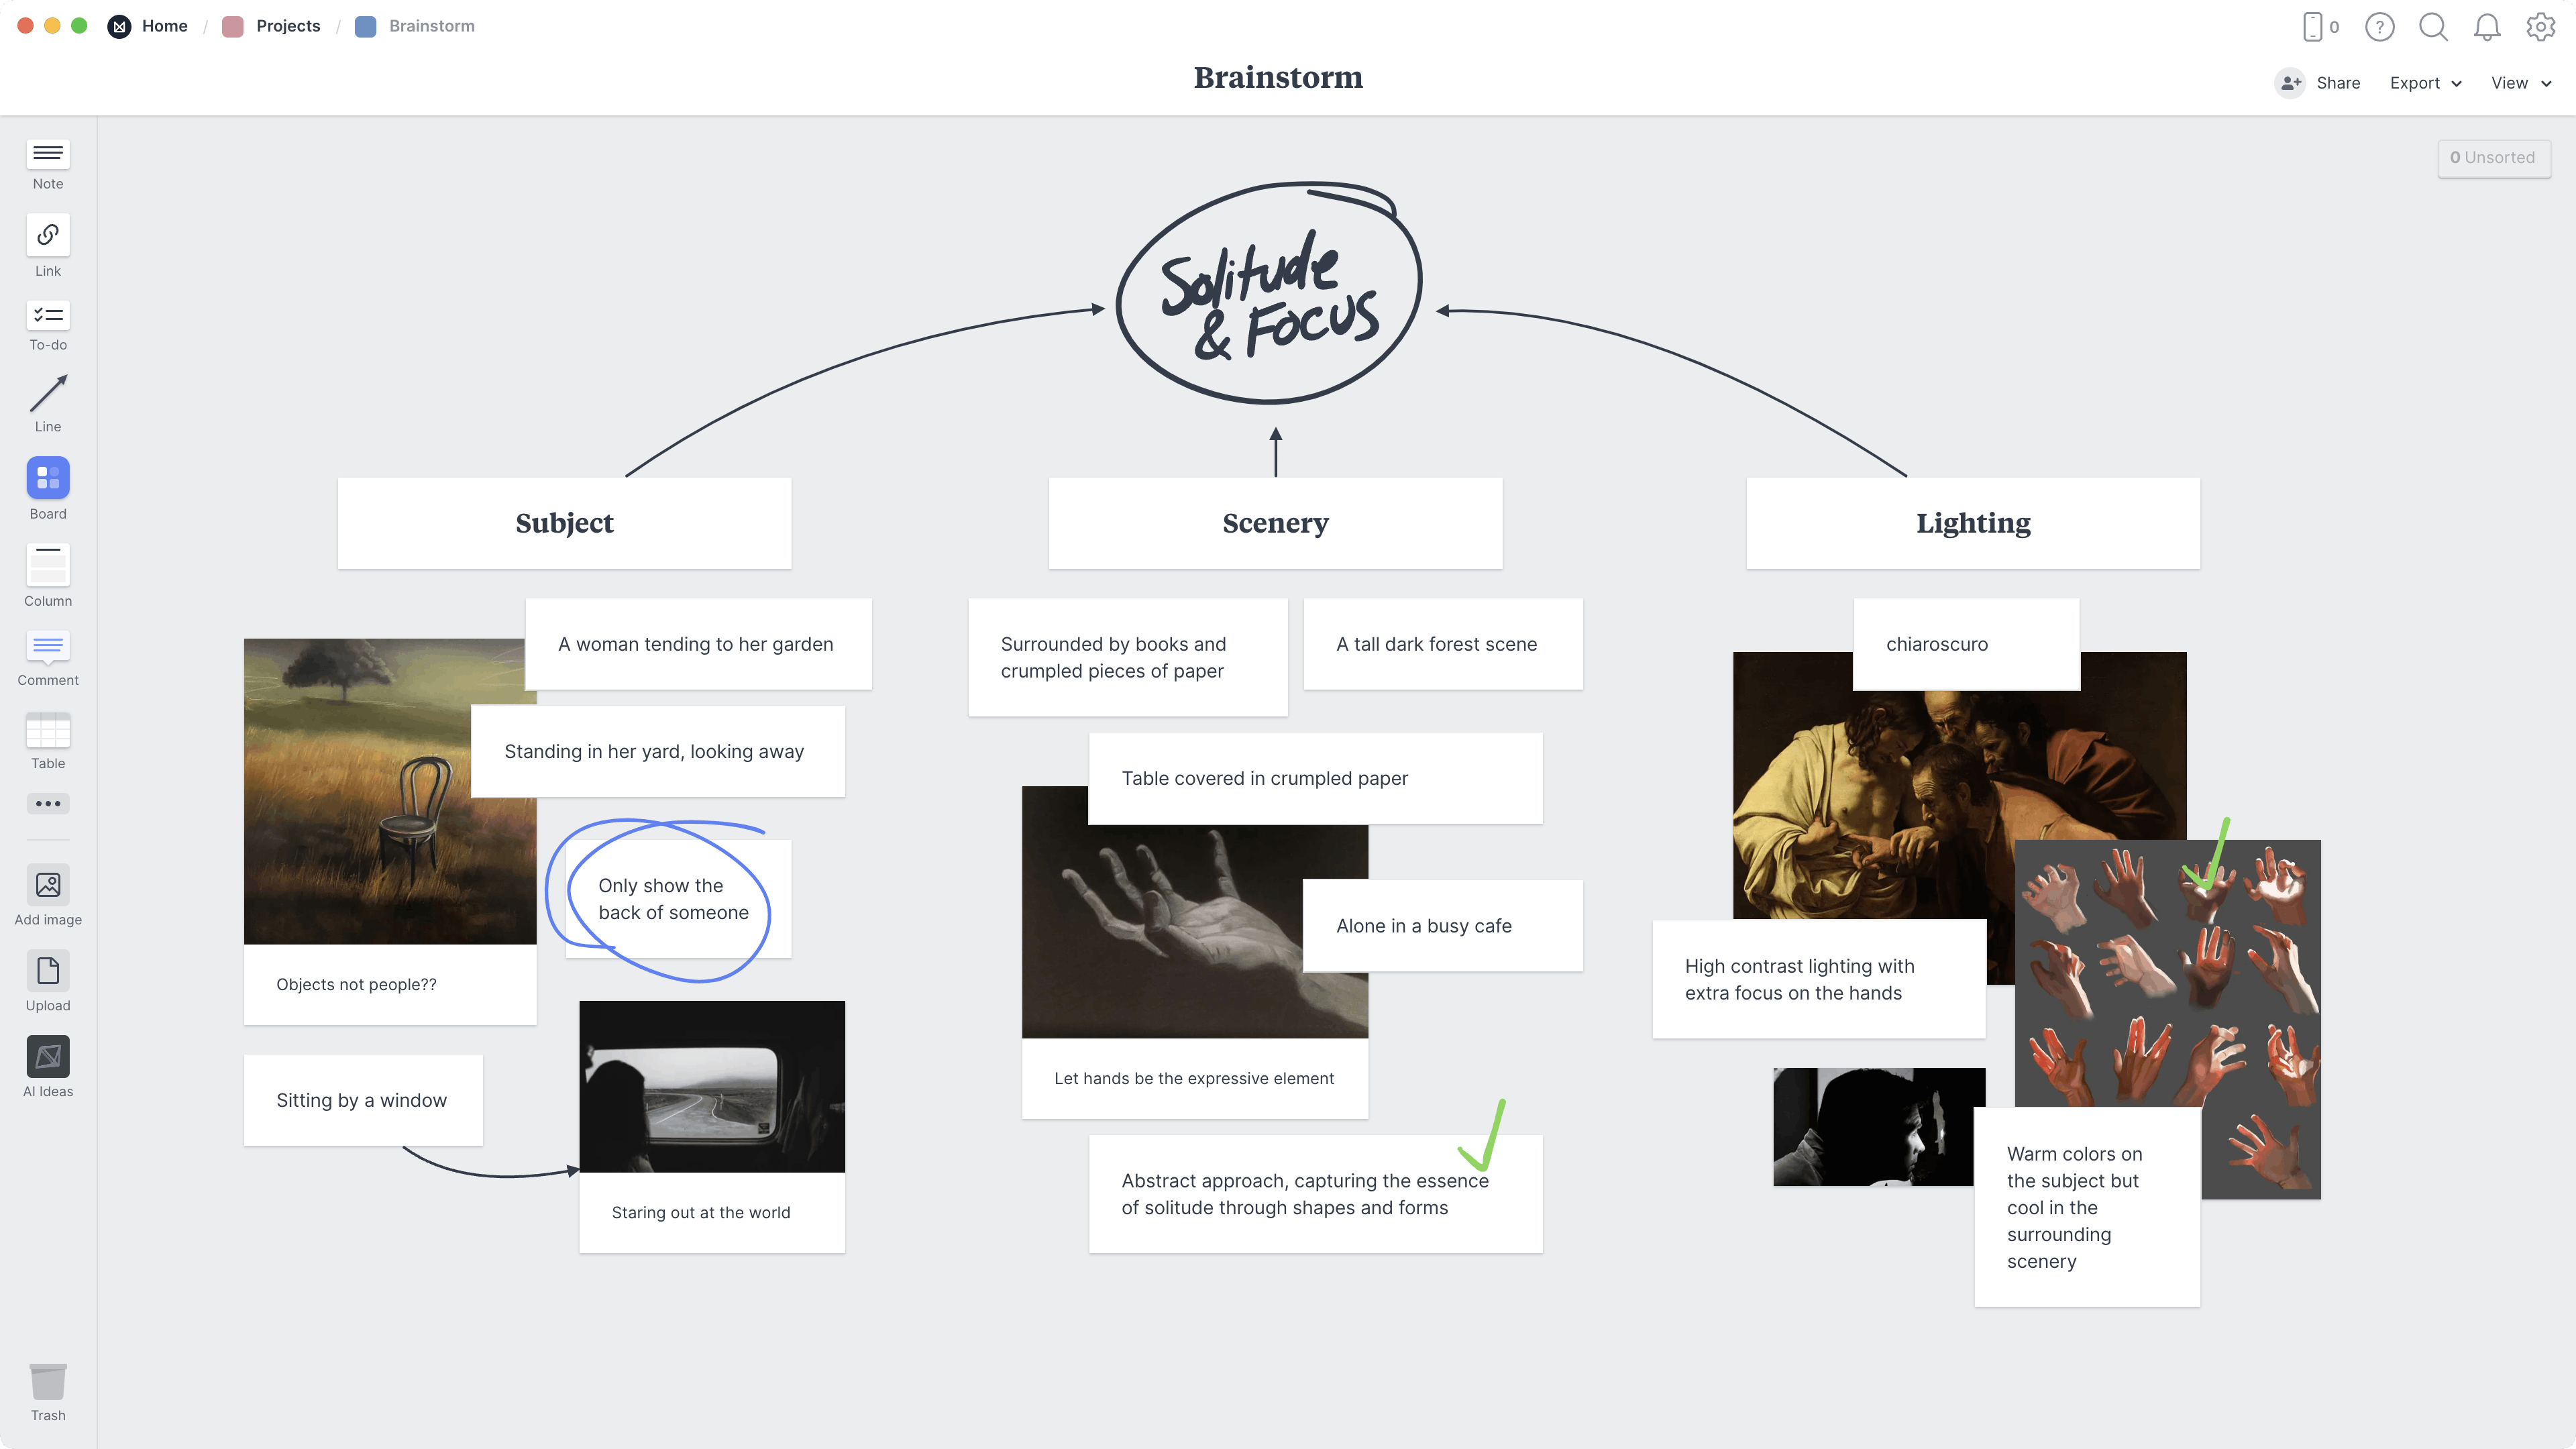 Visual Art Brainstorm Template, within the Milanote app